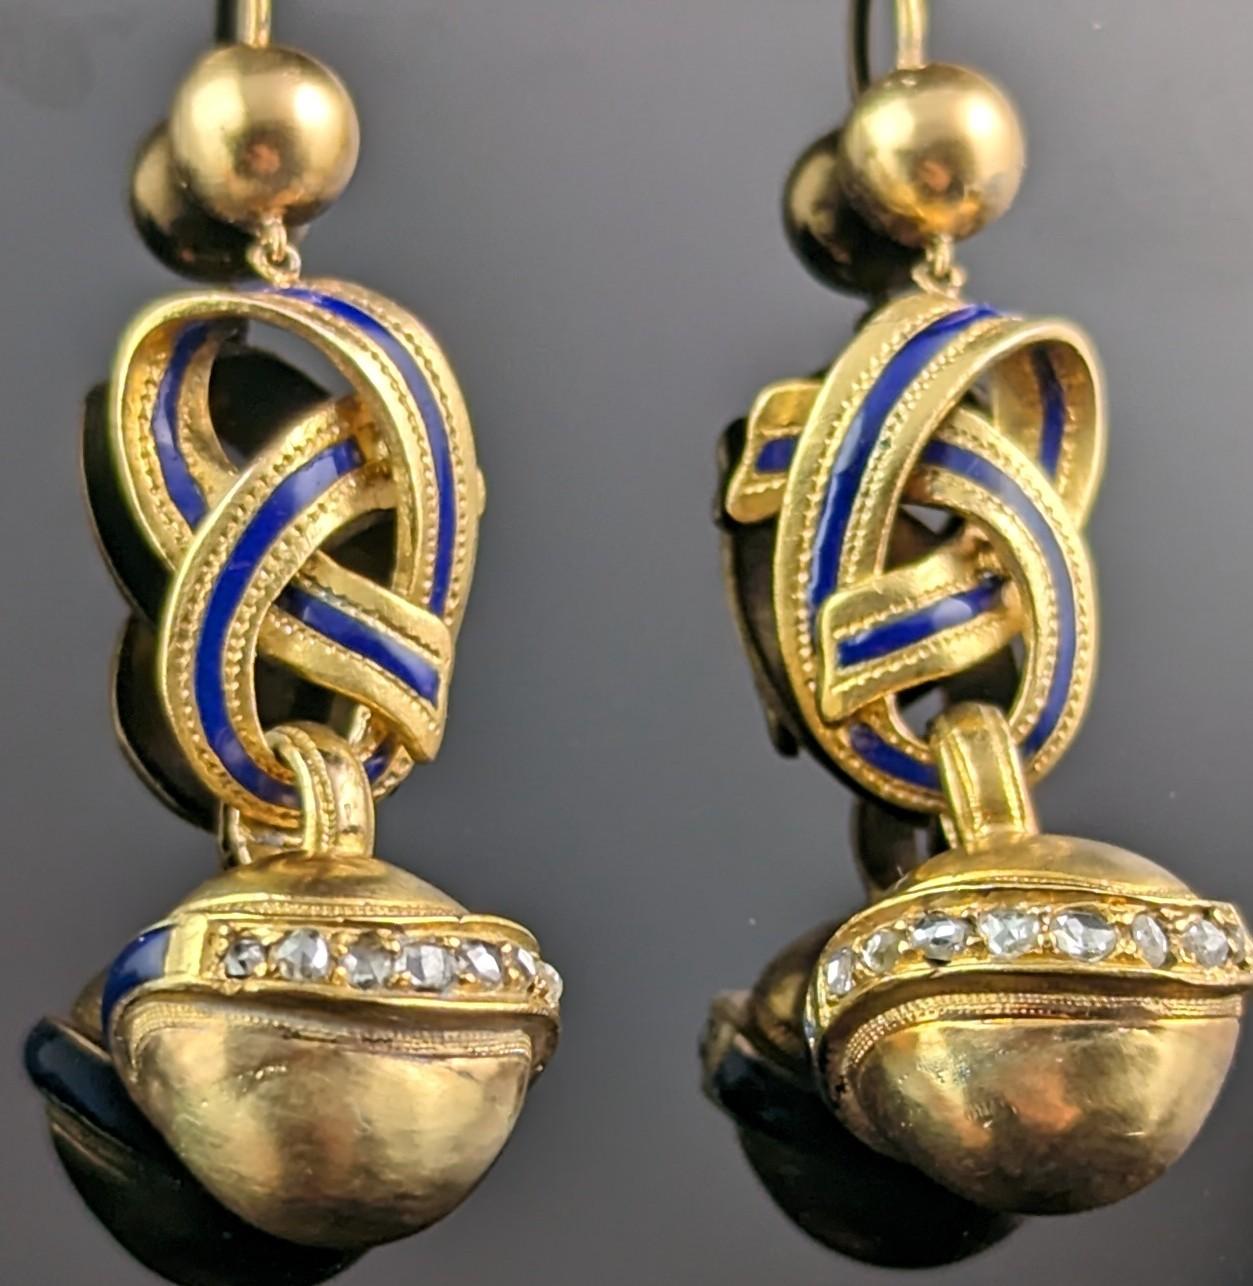 Antique Victorian Diamond lovers knot earrings, 15k gold and Blue enamel For Sale 5